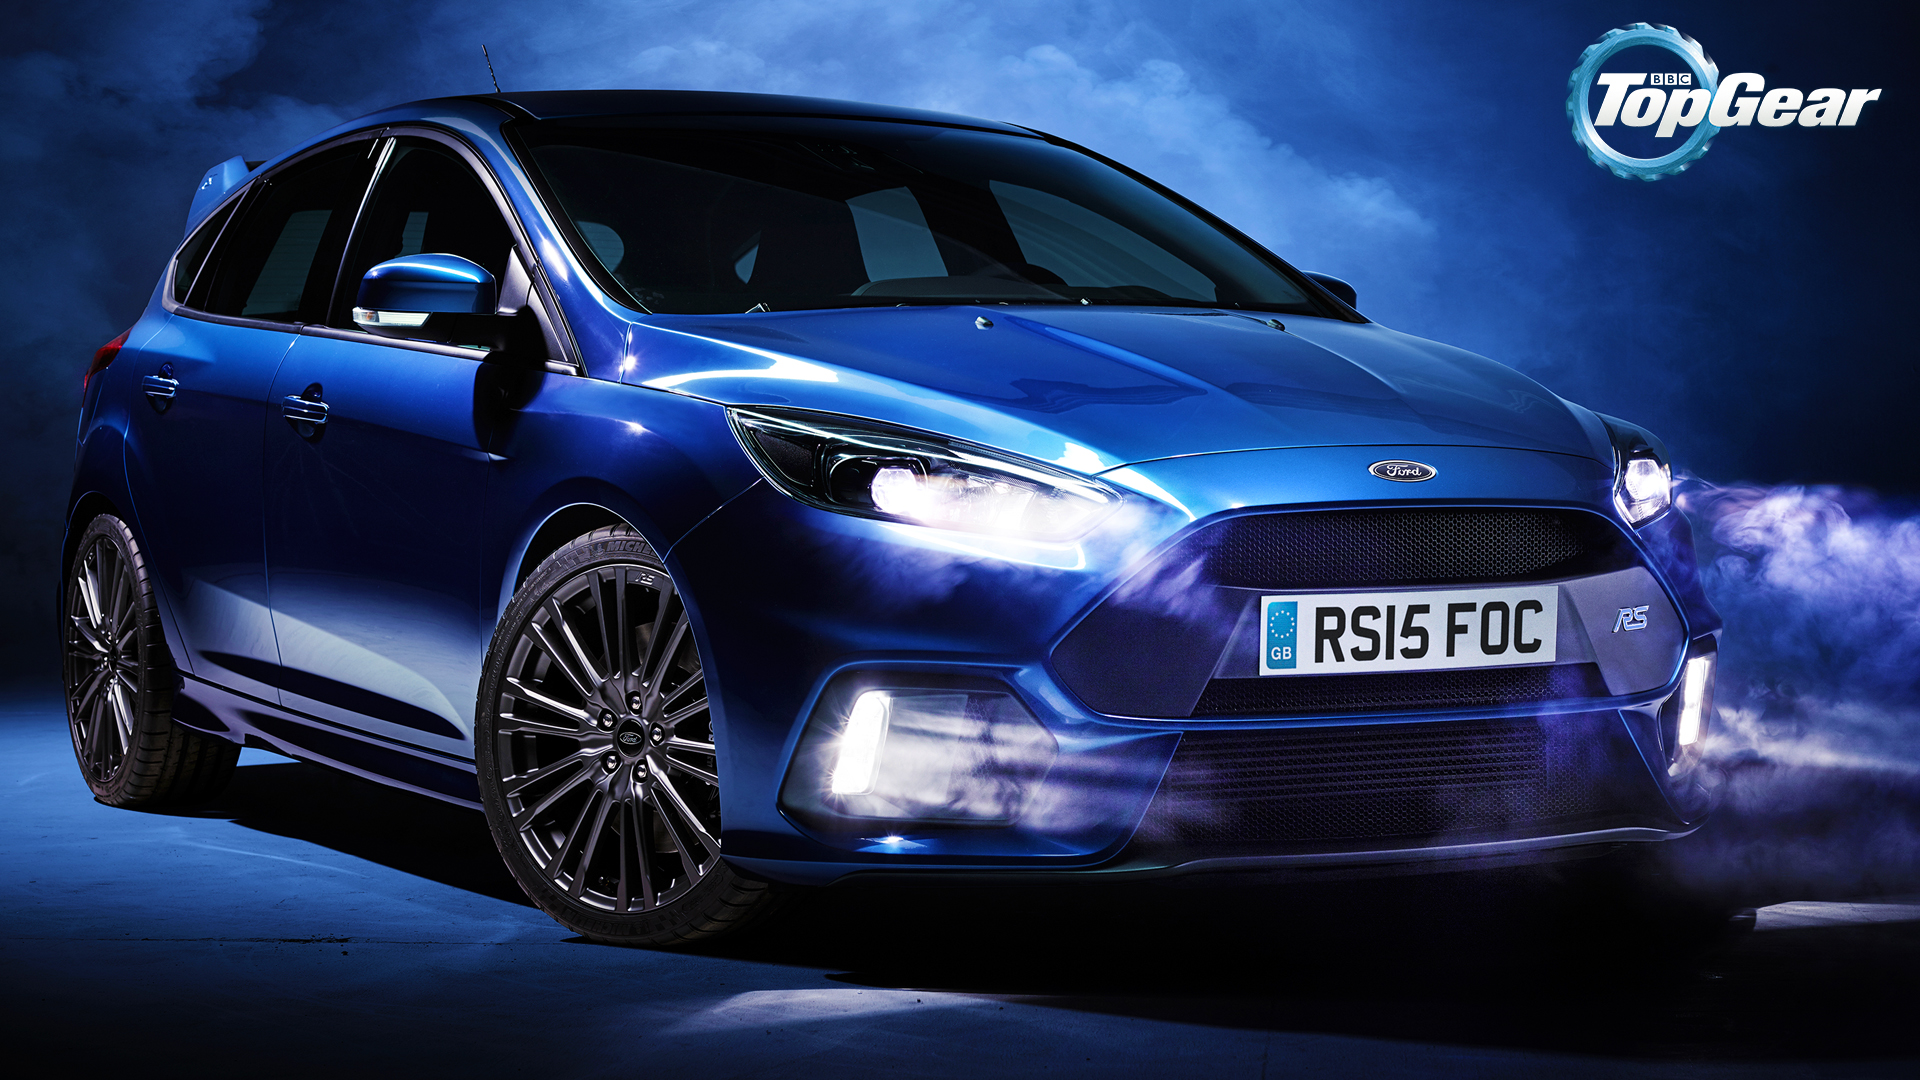 Wallpapers: the new Focus RS